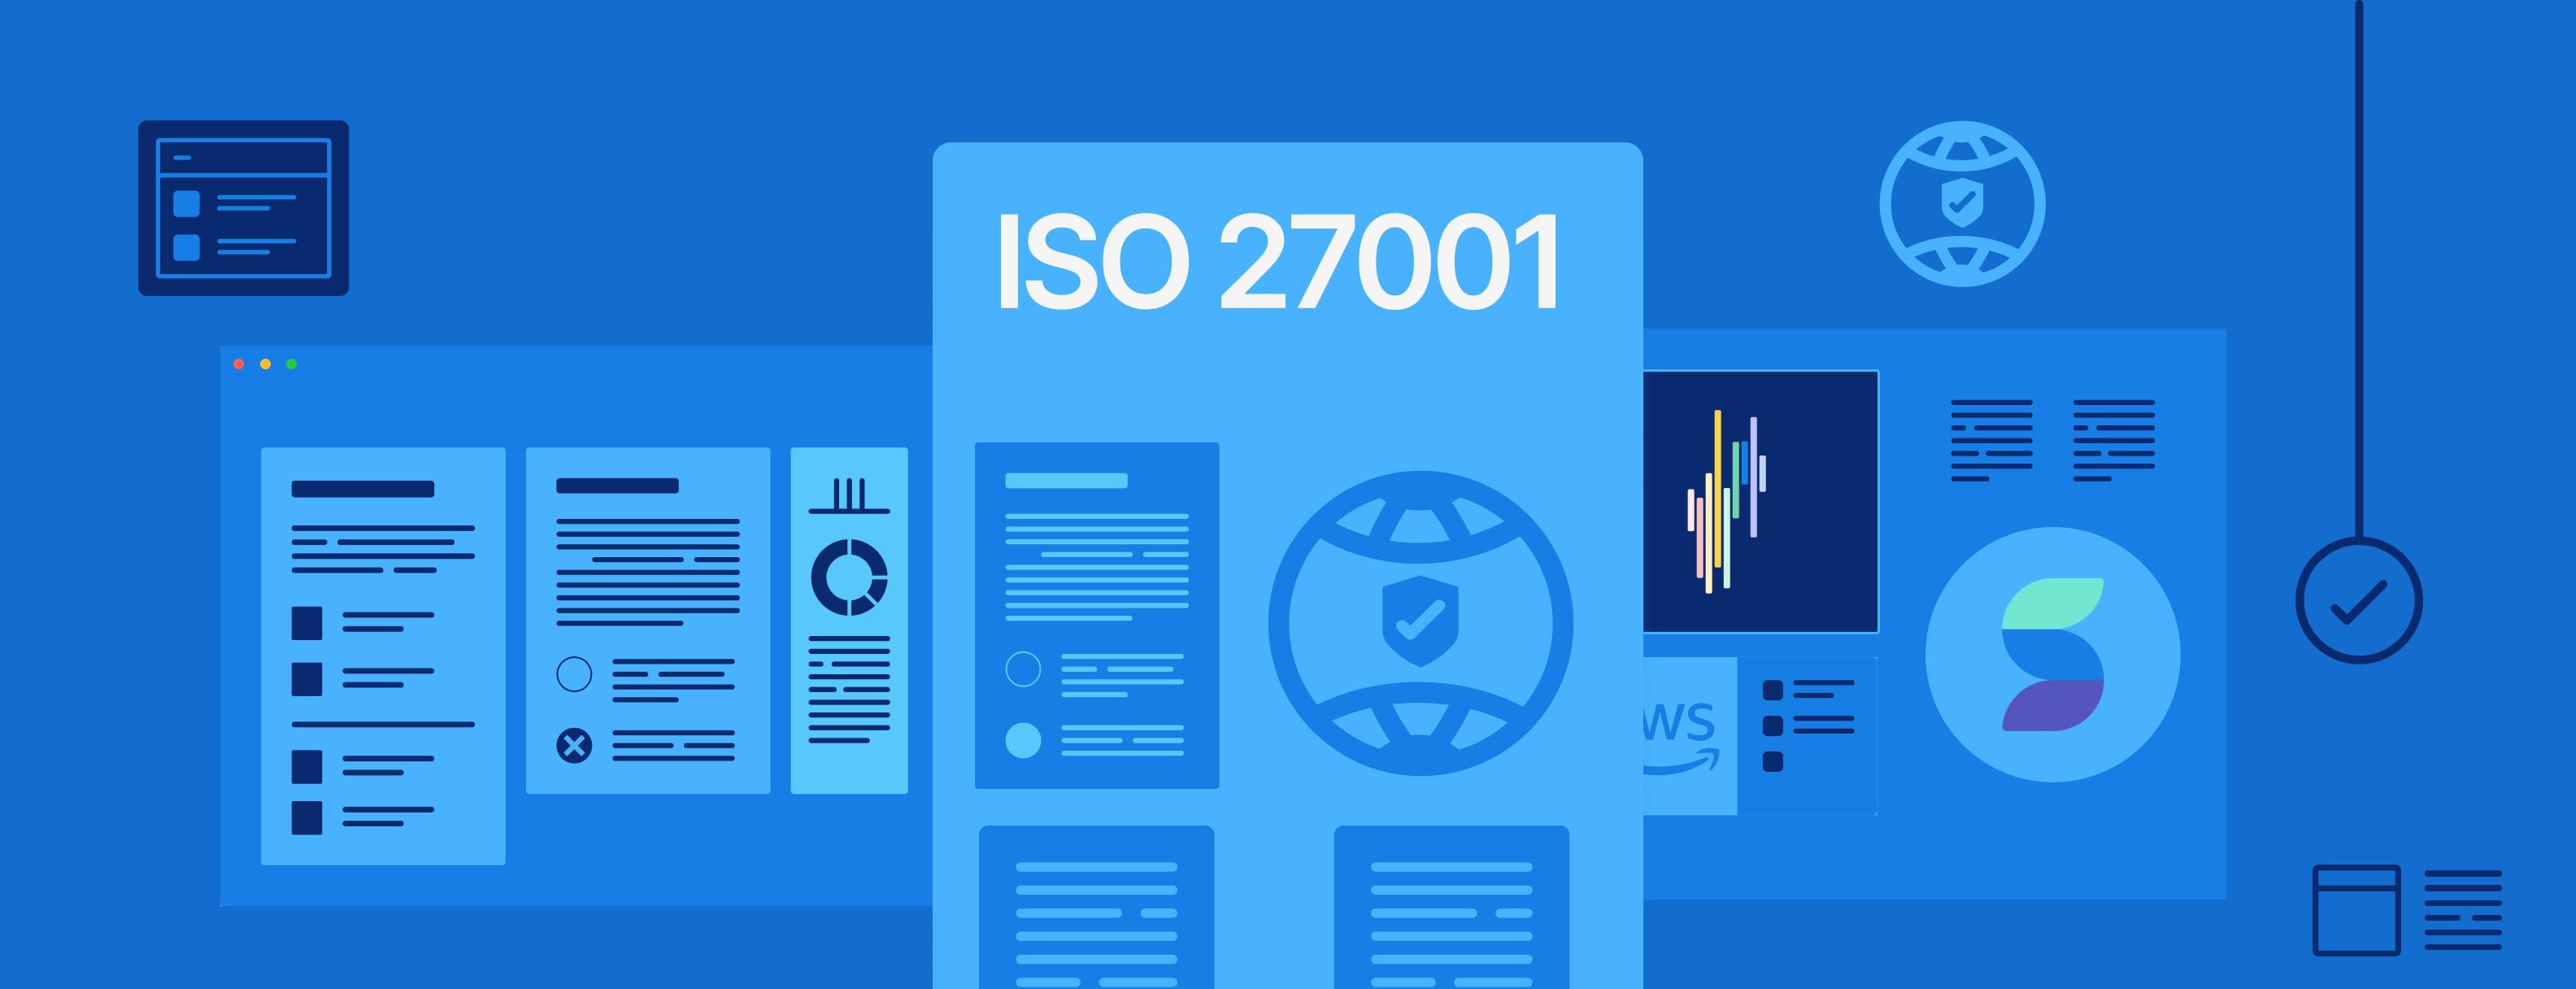 Introducing the ISO 27001 Compliance Hub: 25+ Free Resources to Simplify Certification